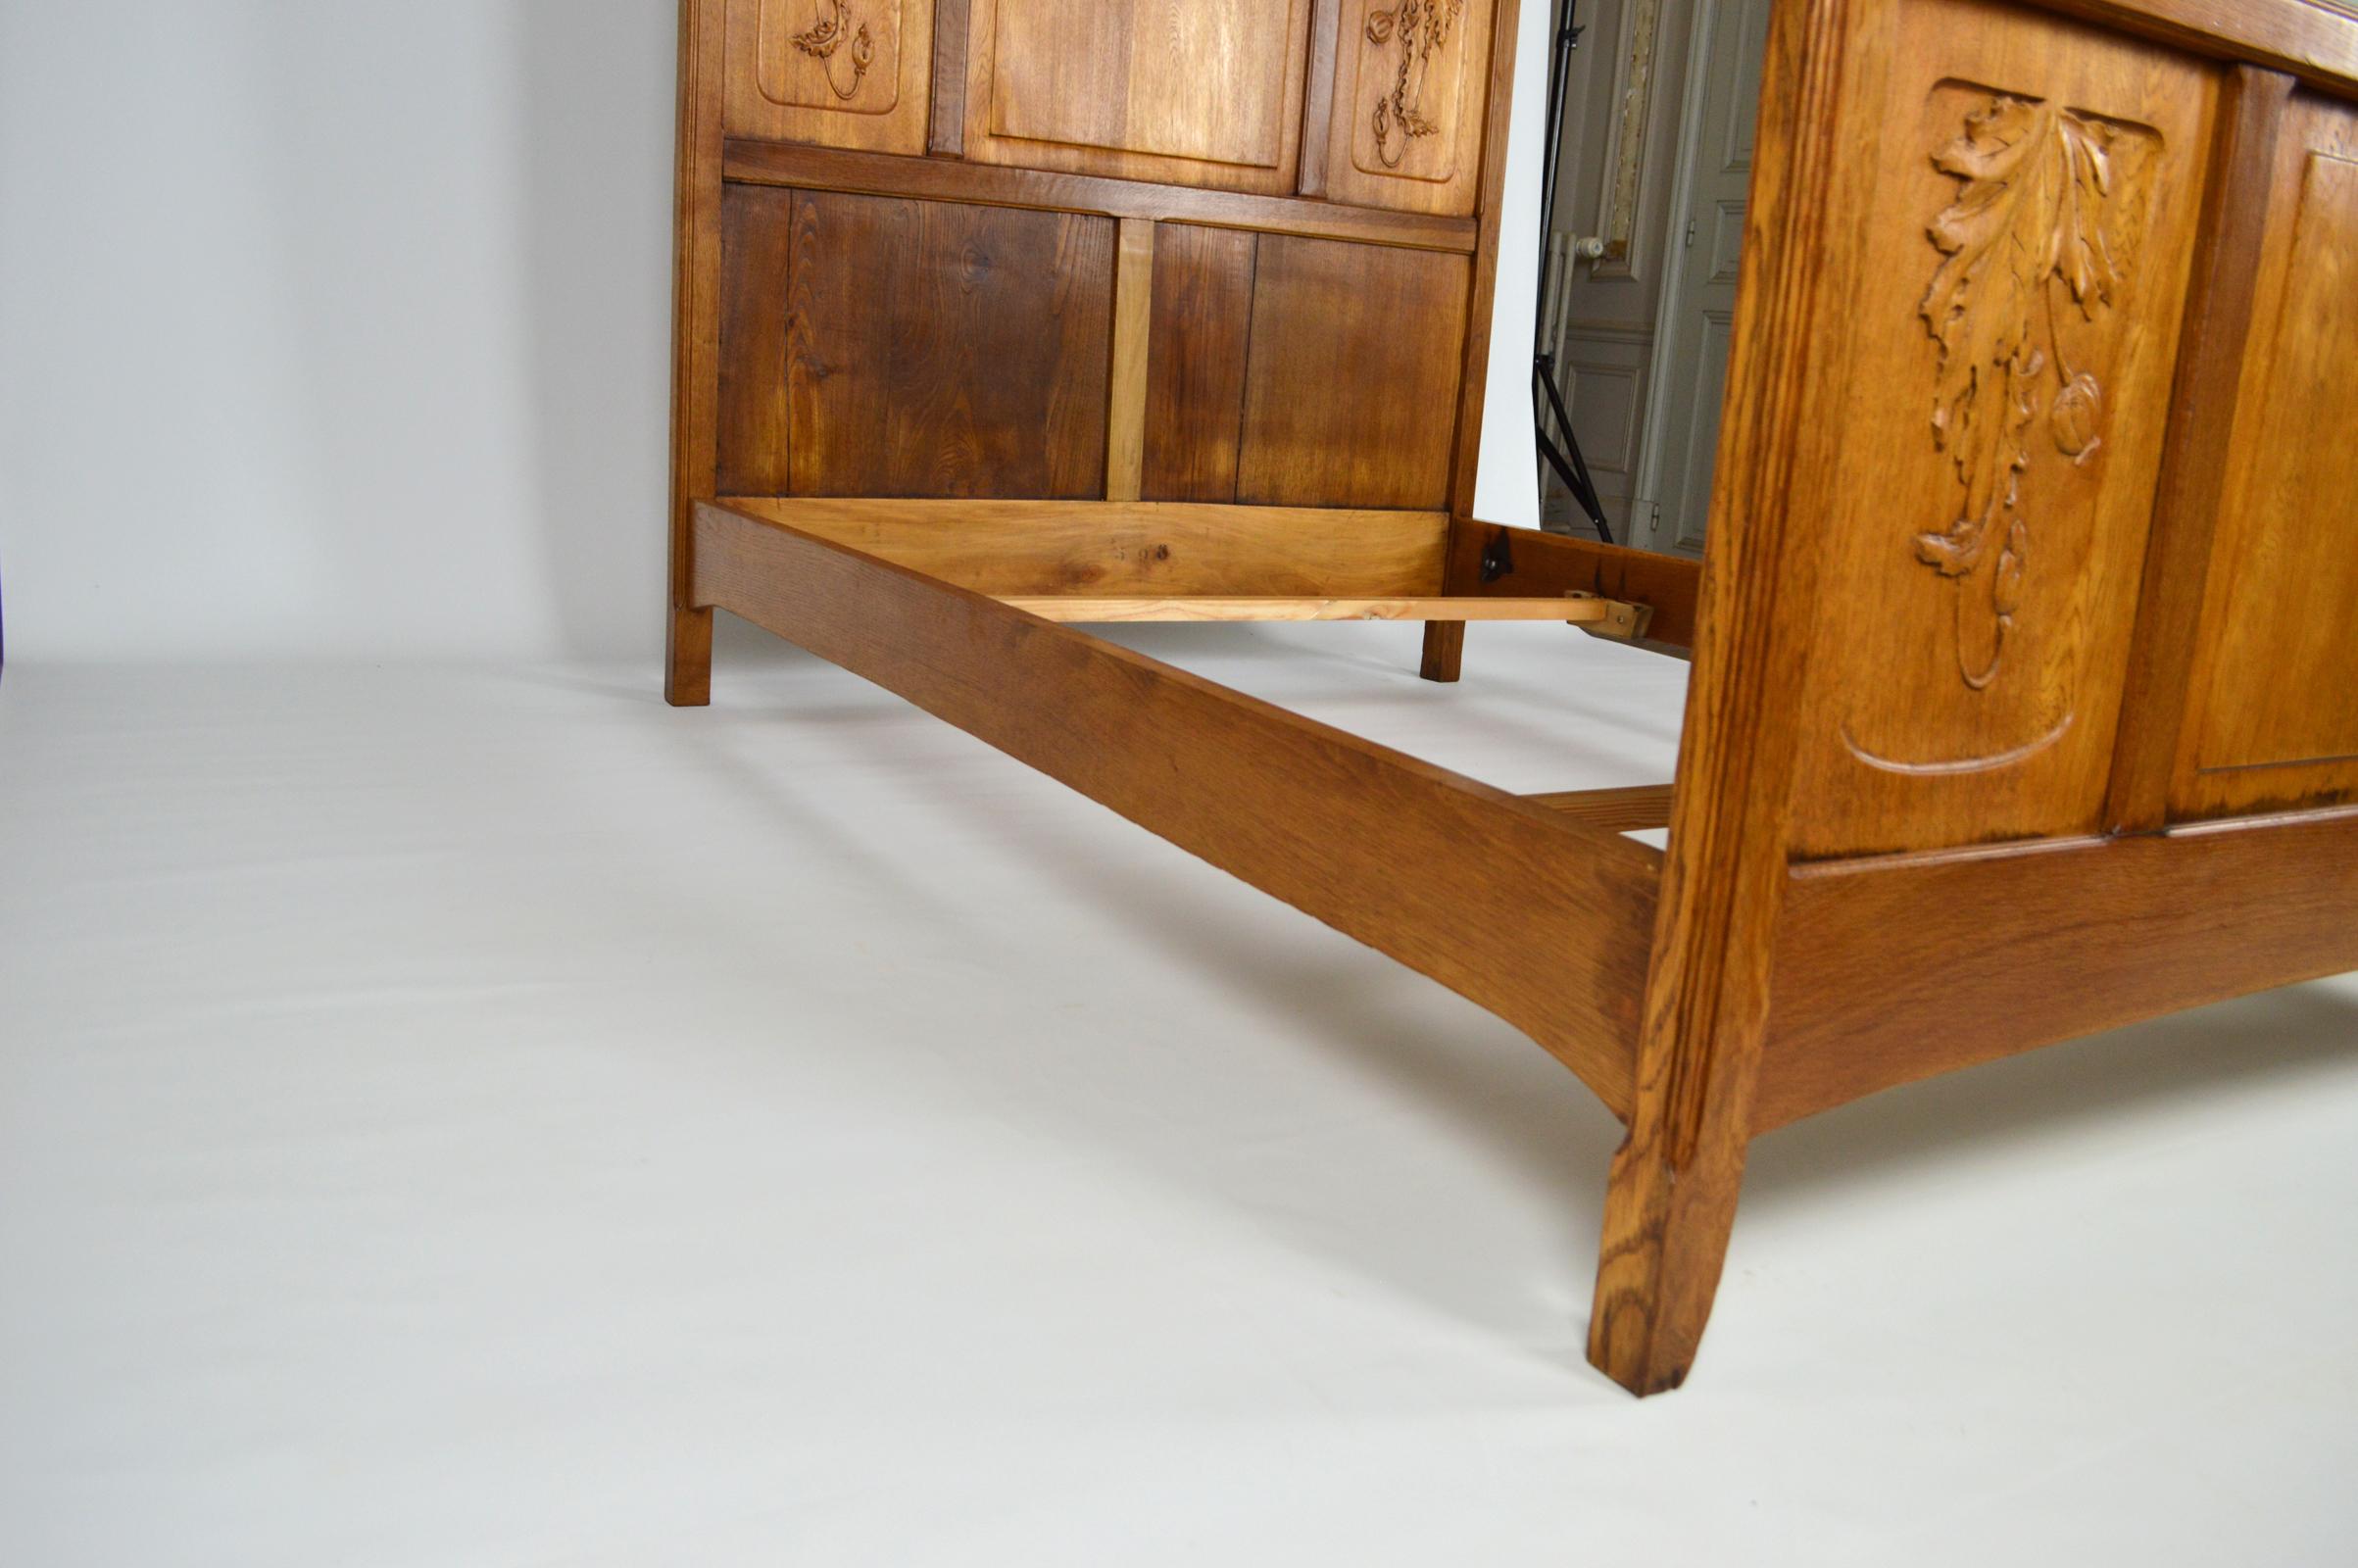 Art Nouveau Bed in Carved Oak, Opium Poppy Theme, France, circa 1910 For Sale 8